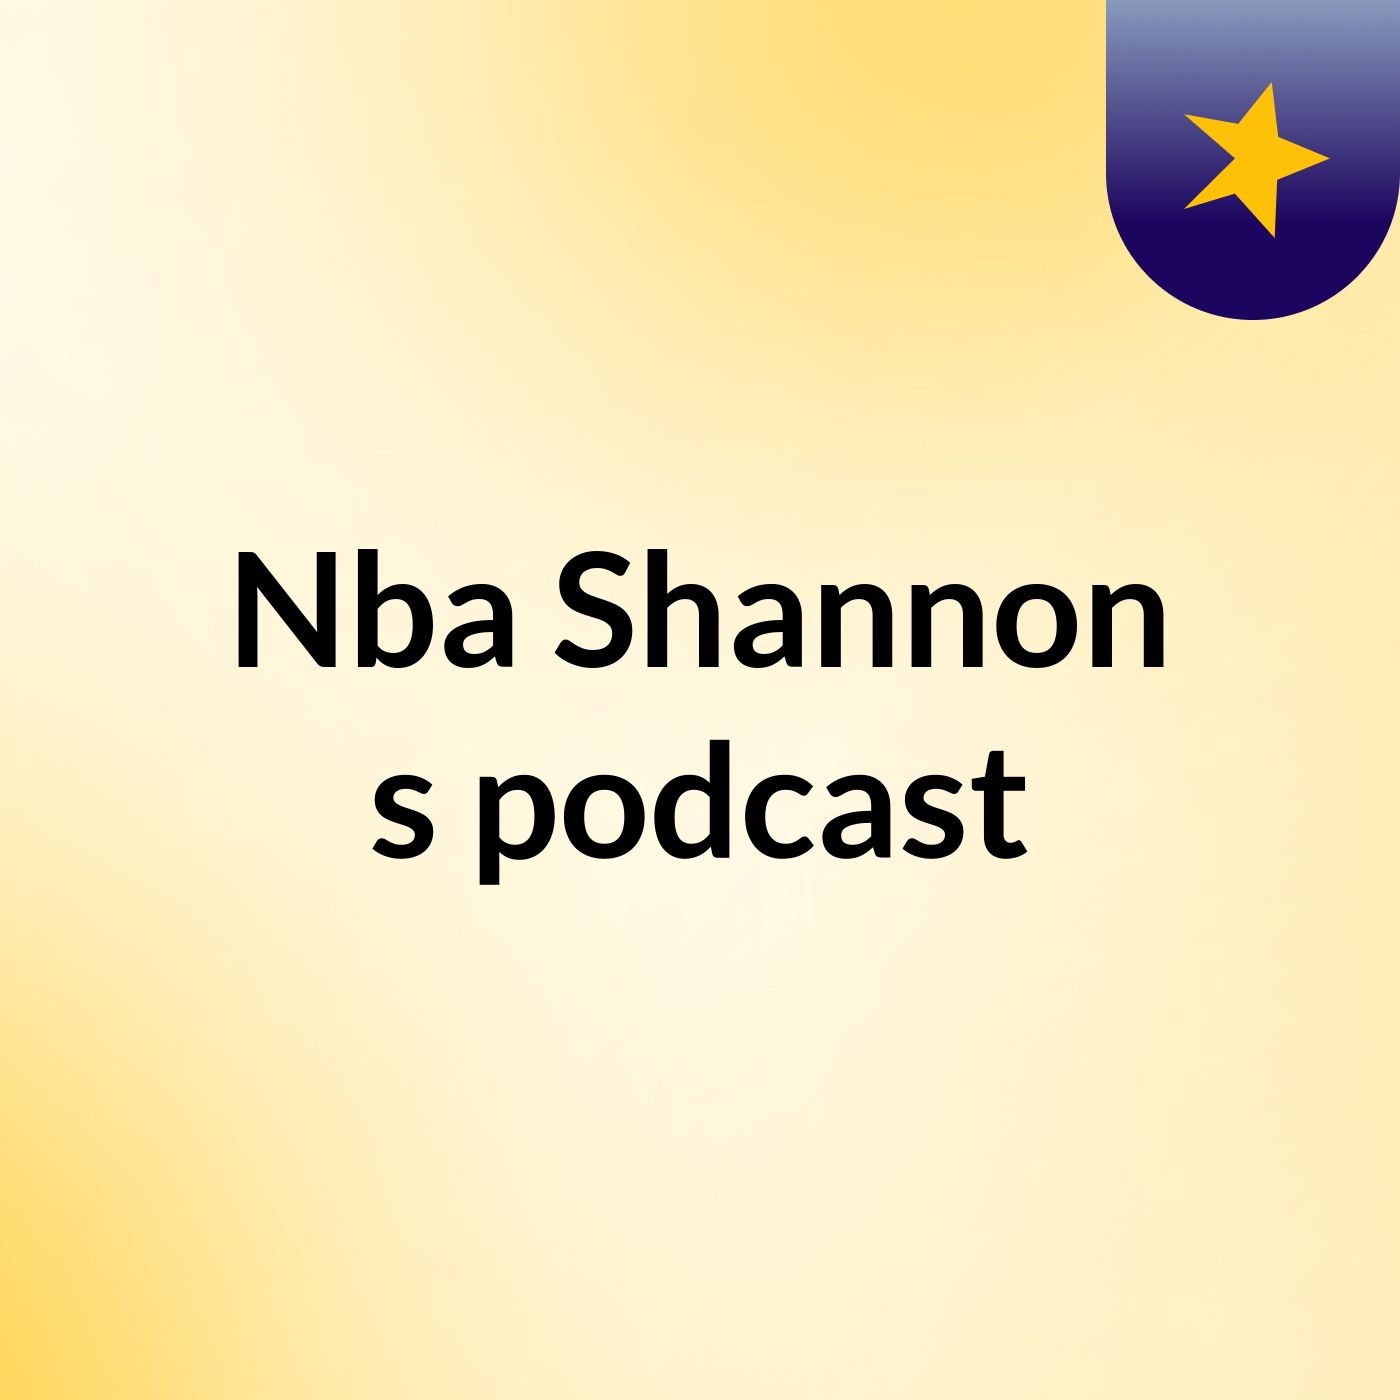 Episode 2 - Nba Shannon's podcast